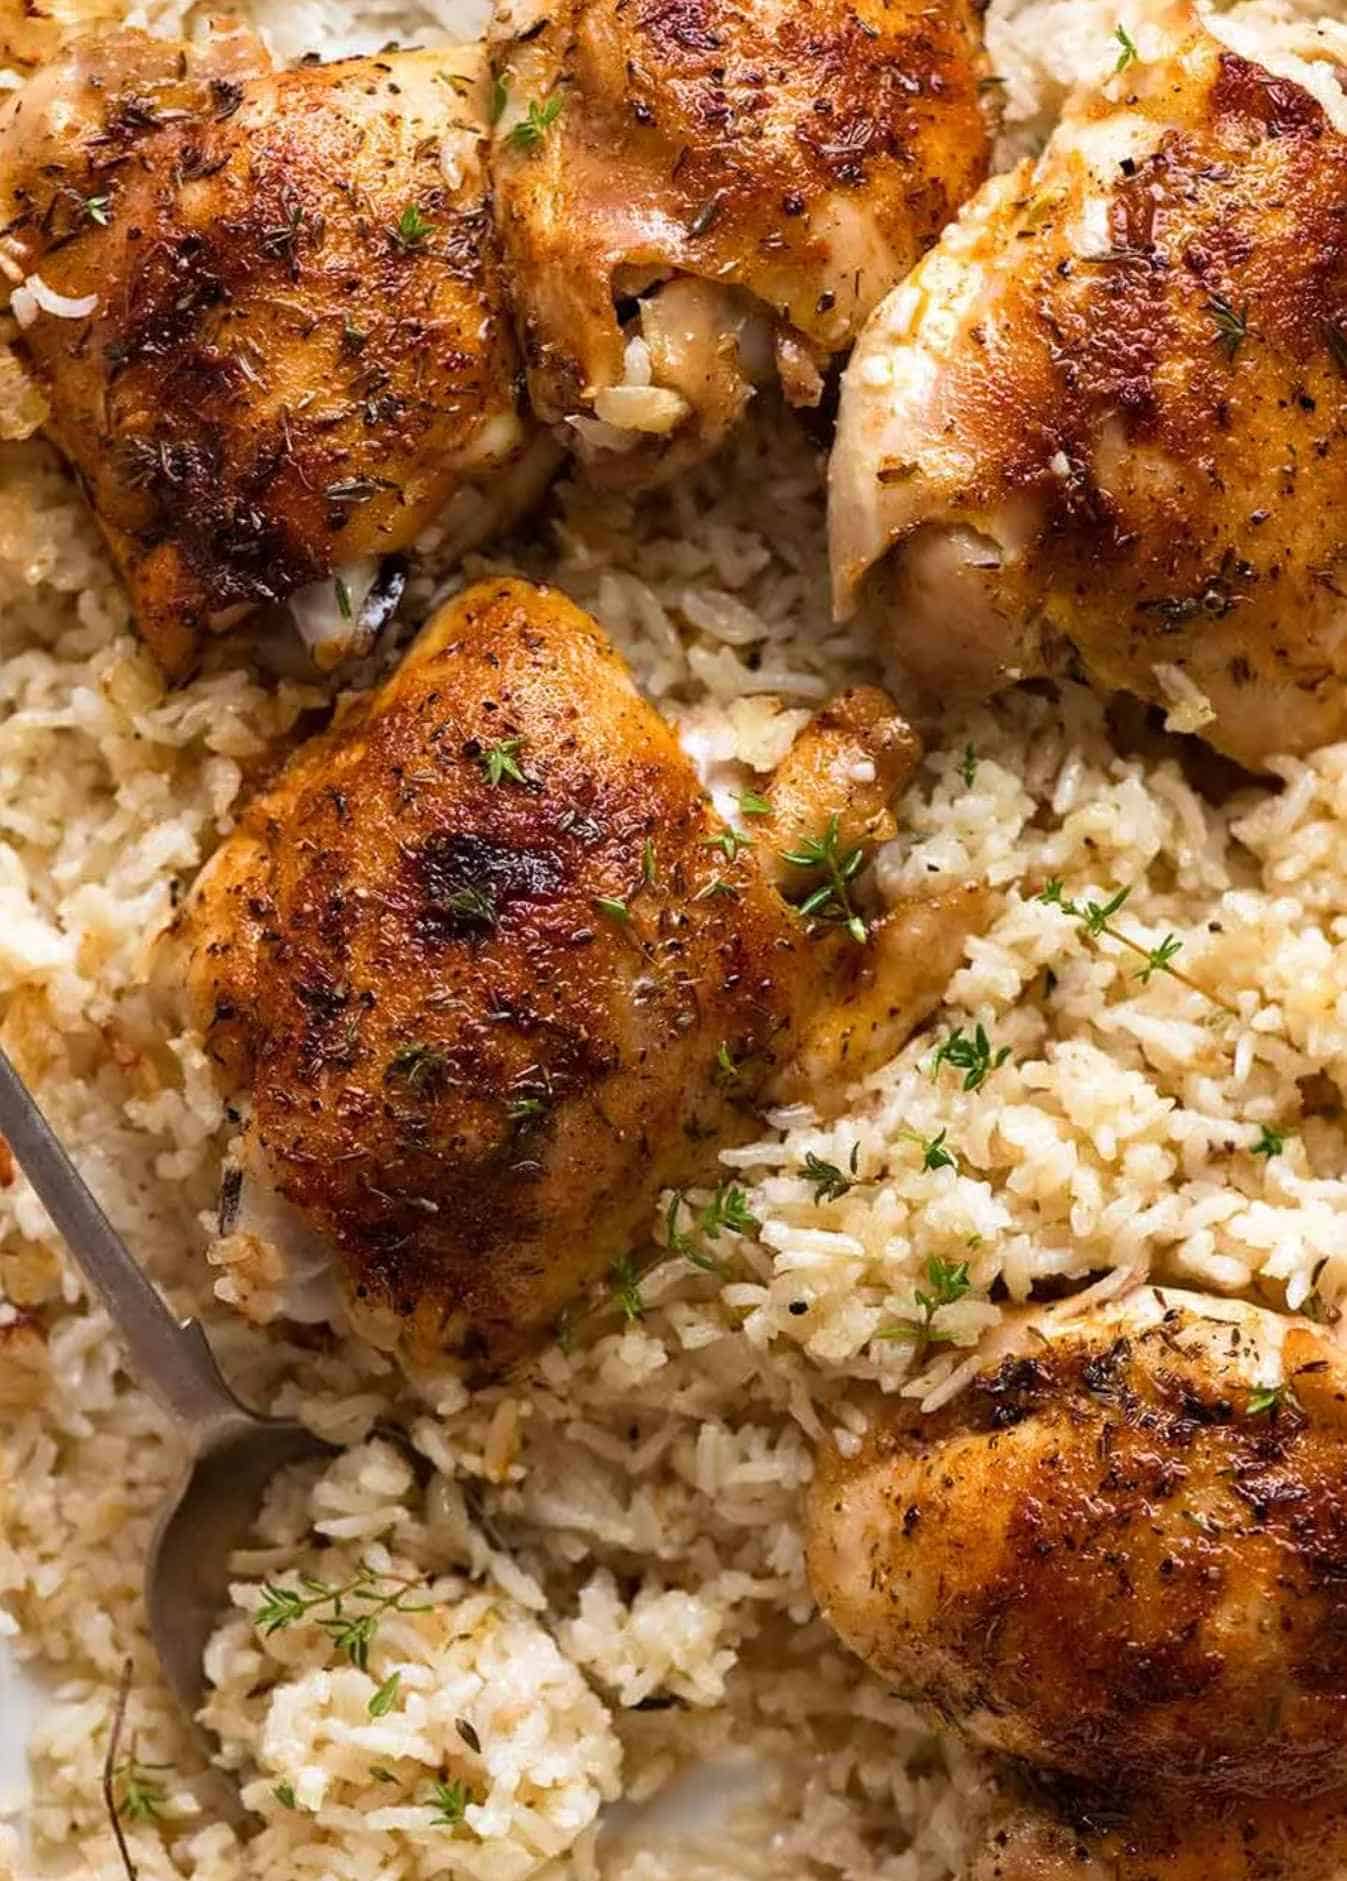 Oven-baked chicken and rice